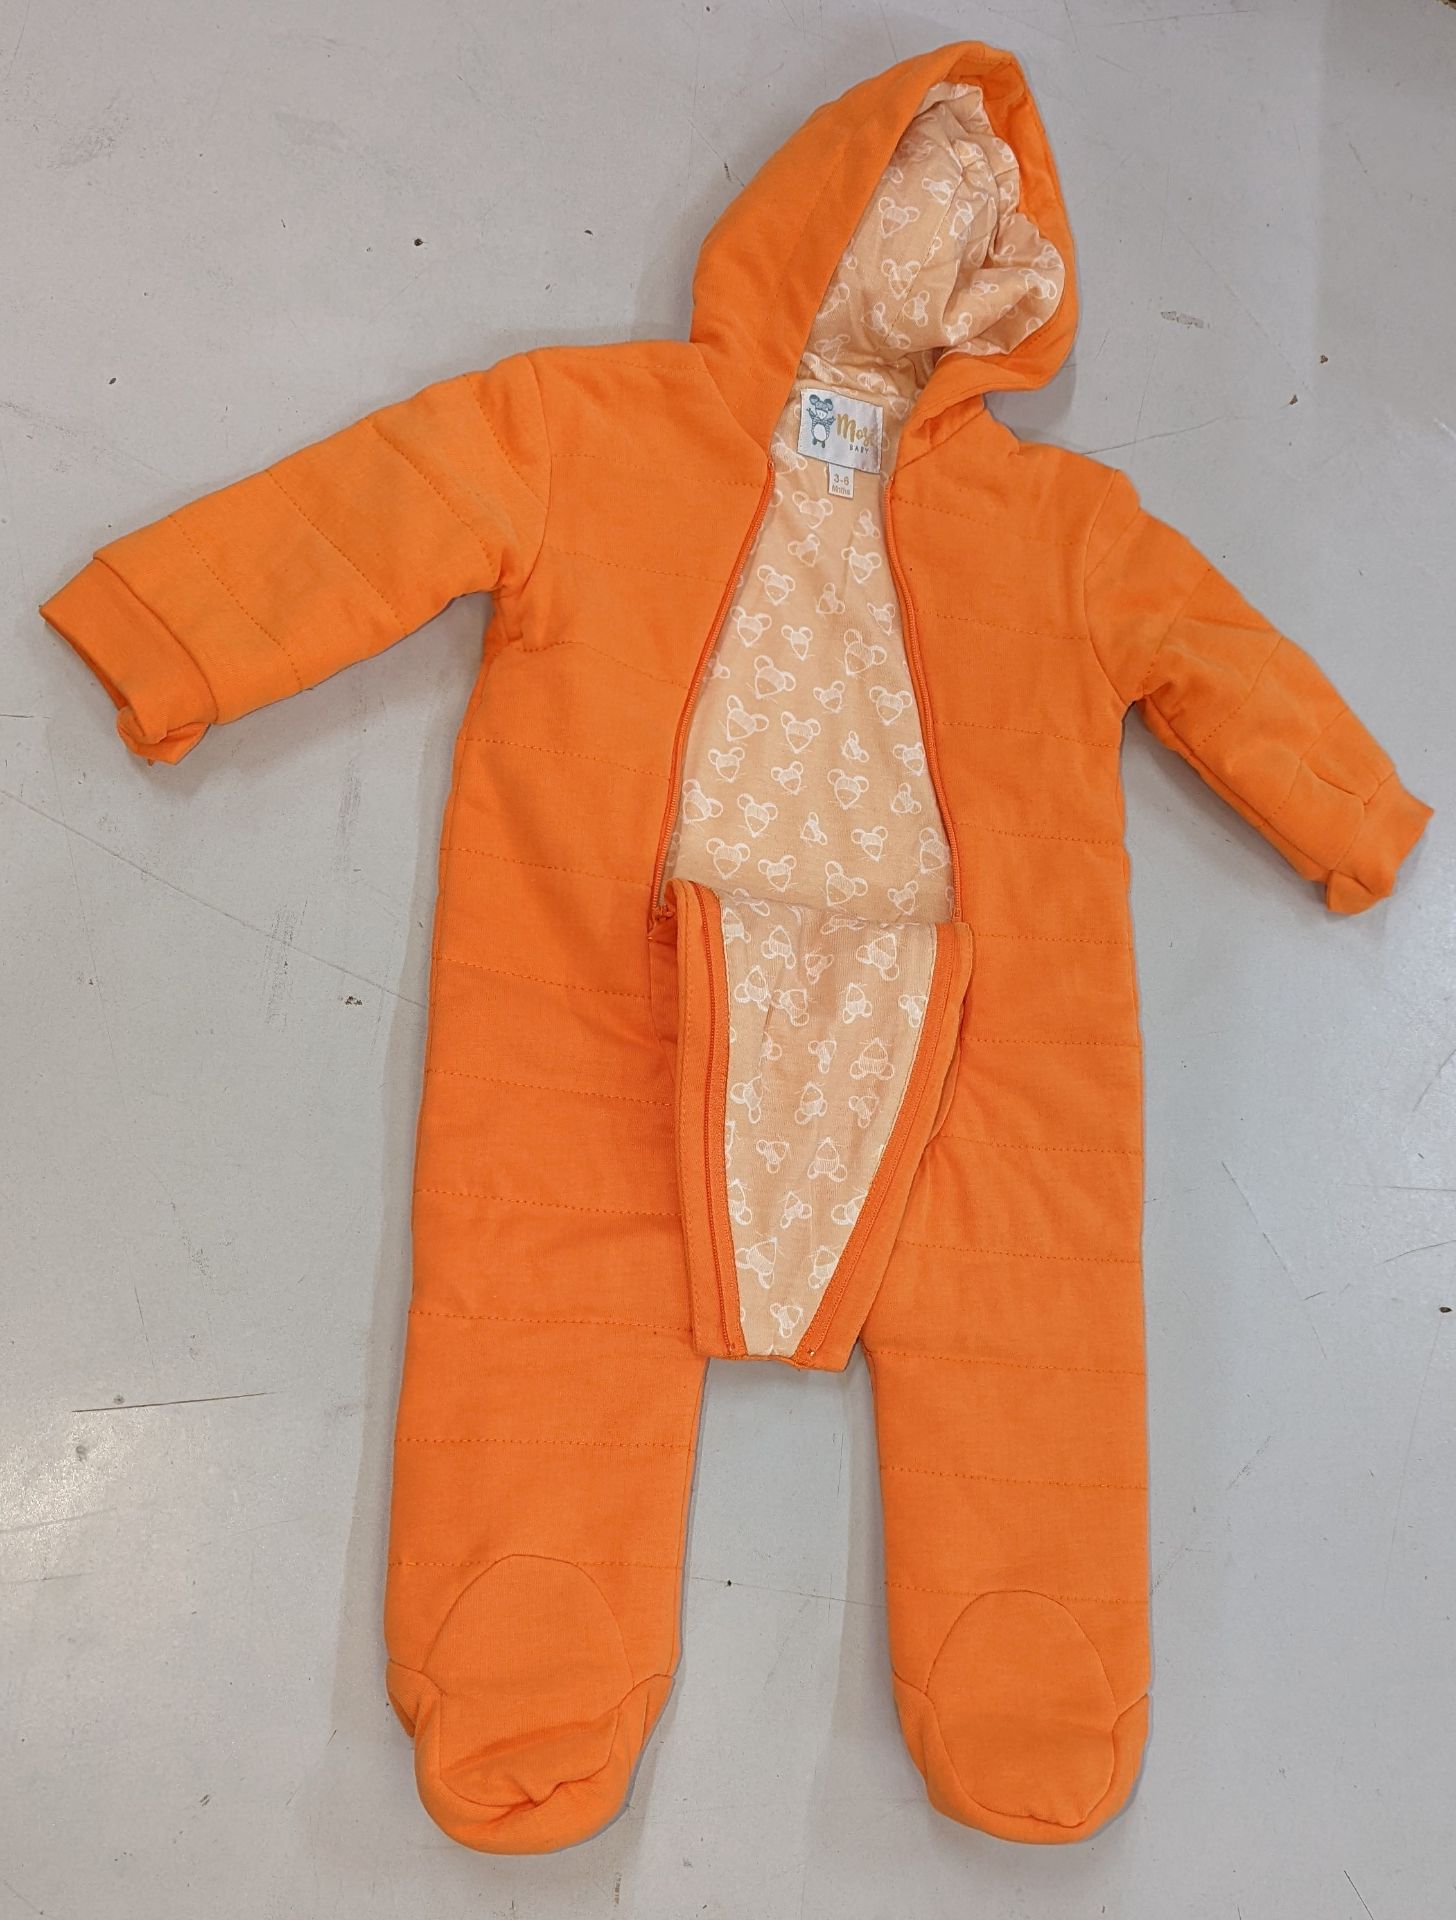 16 off Mosé Baby unisex orange romper body suits, in 100% cotton with Mosé Baby print lining. Age 0 - Image 2 of 10